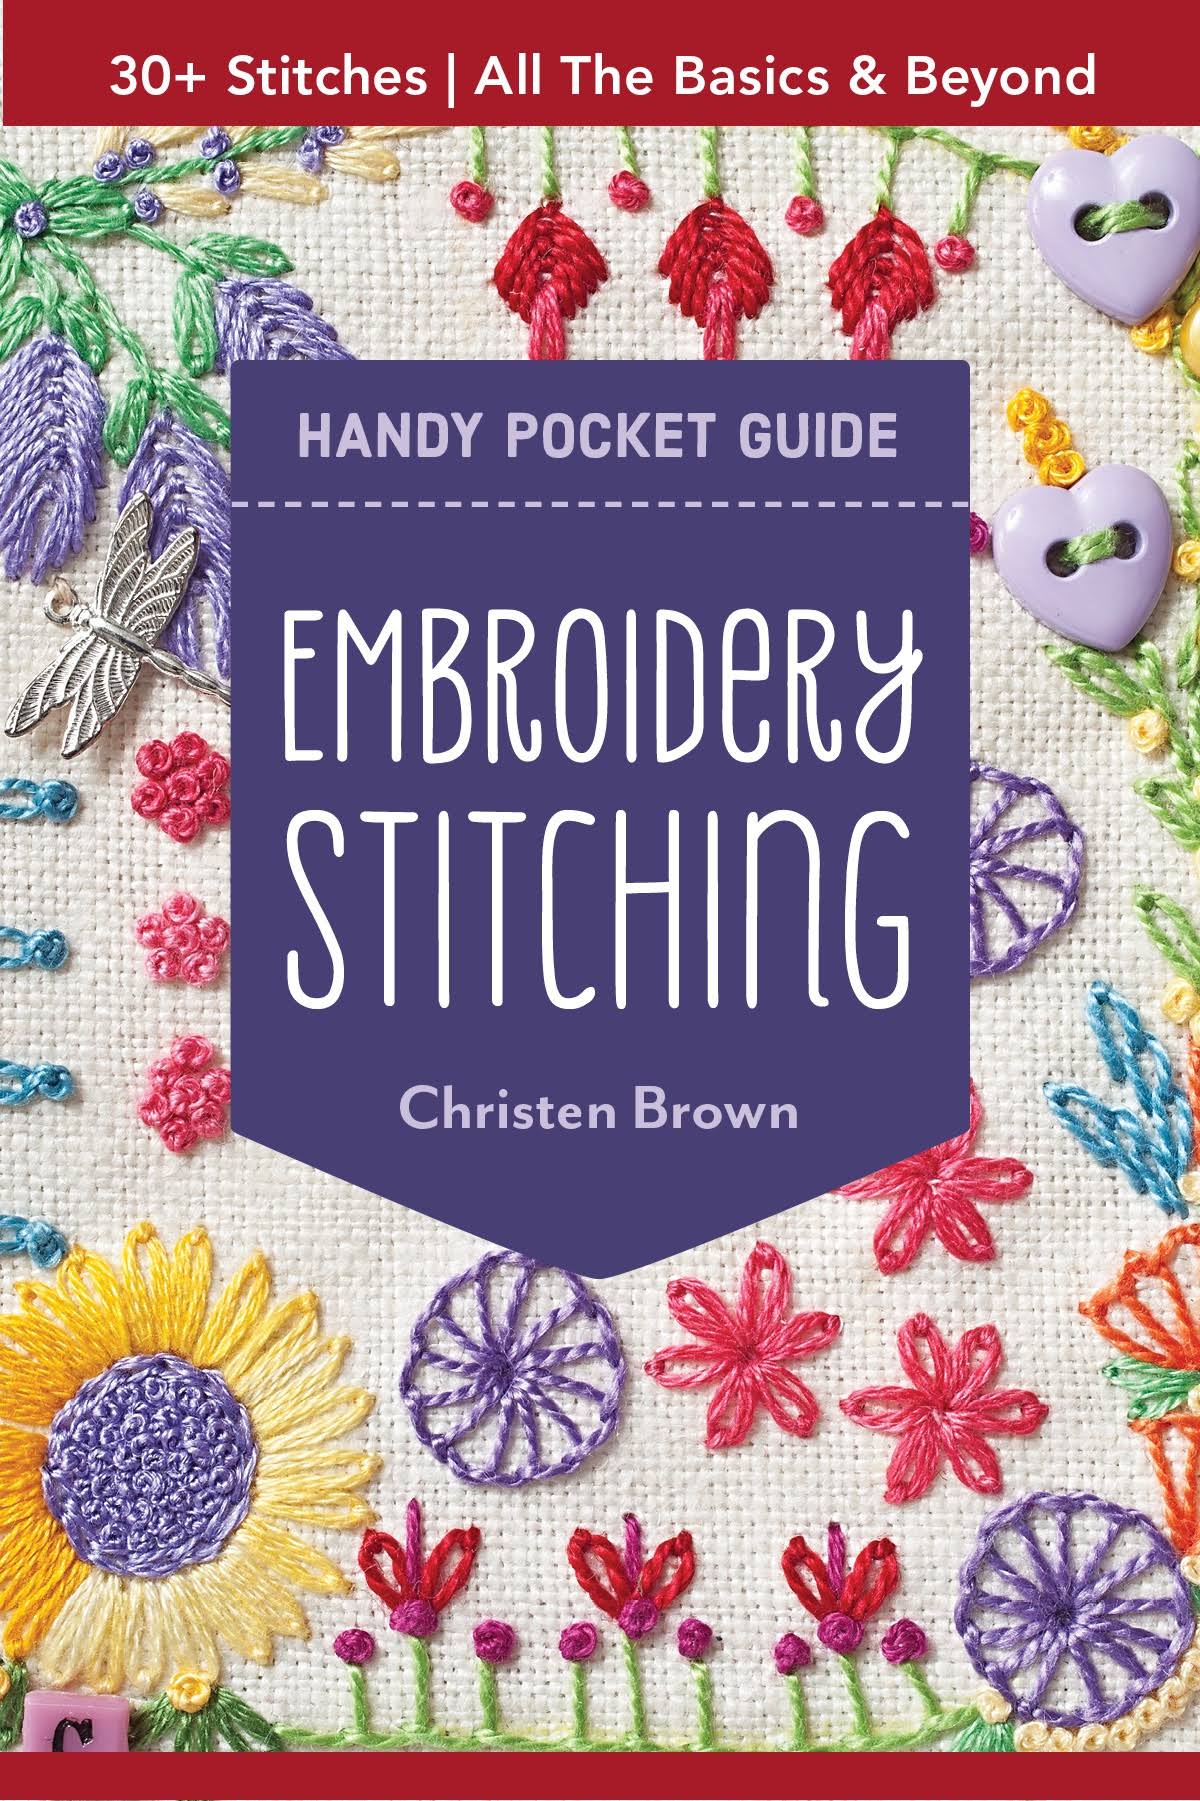 Embroidery Stitching Handy Pocket Guide - Christen Brown